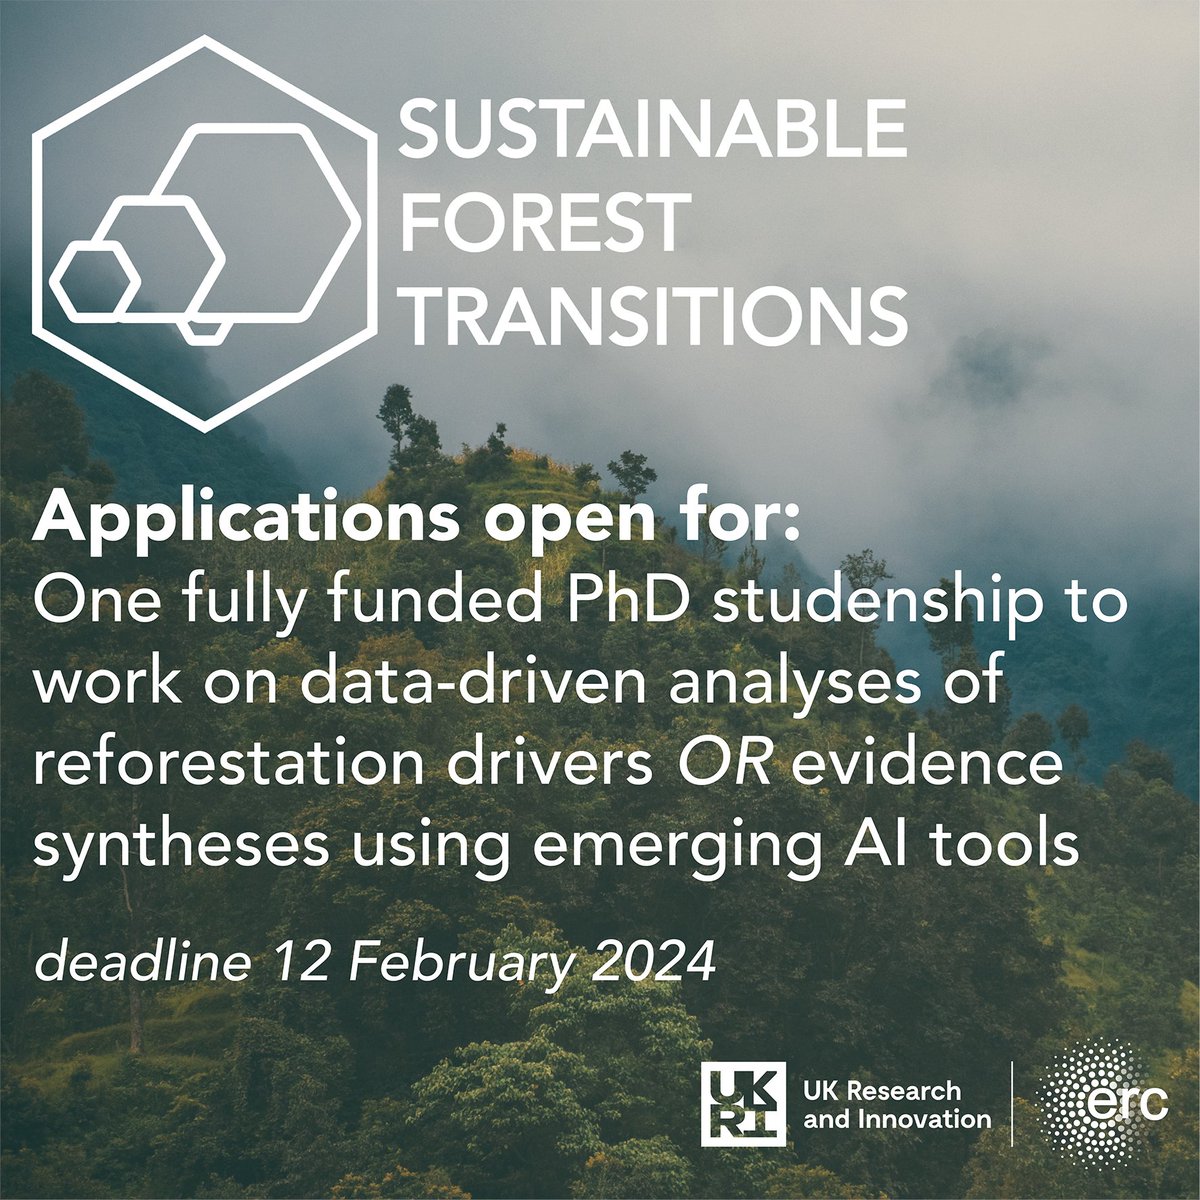 🚨 Interested in #ForestRestoration, #Data, #CausalInference and/OR #EvidenceSynthesis? Consider applying for this #PhD studentship with our #SustainableForestTransitions team 🚨 Fully funded and open to international students. For more info tinyurl.com/yxsafn79